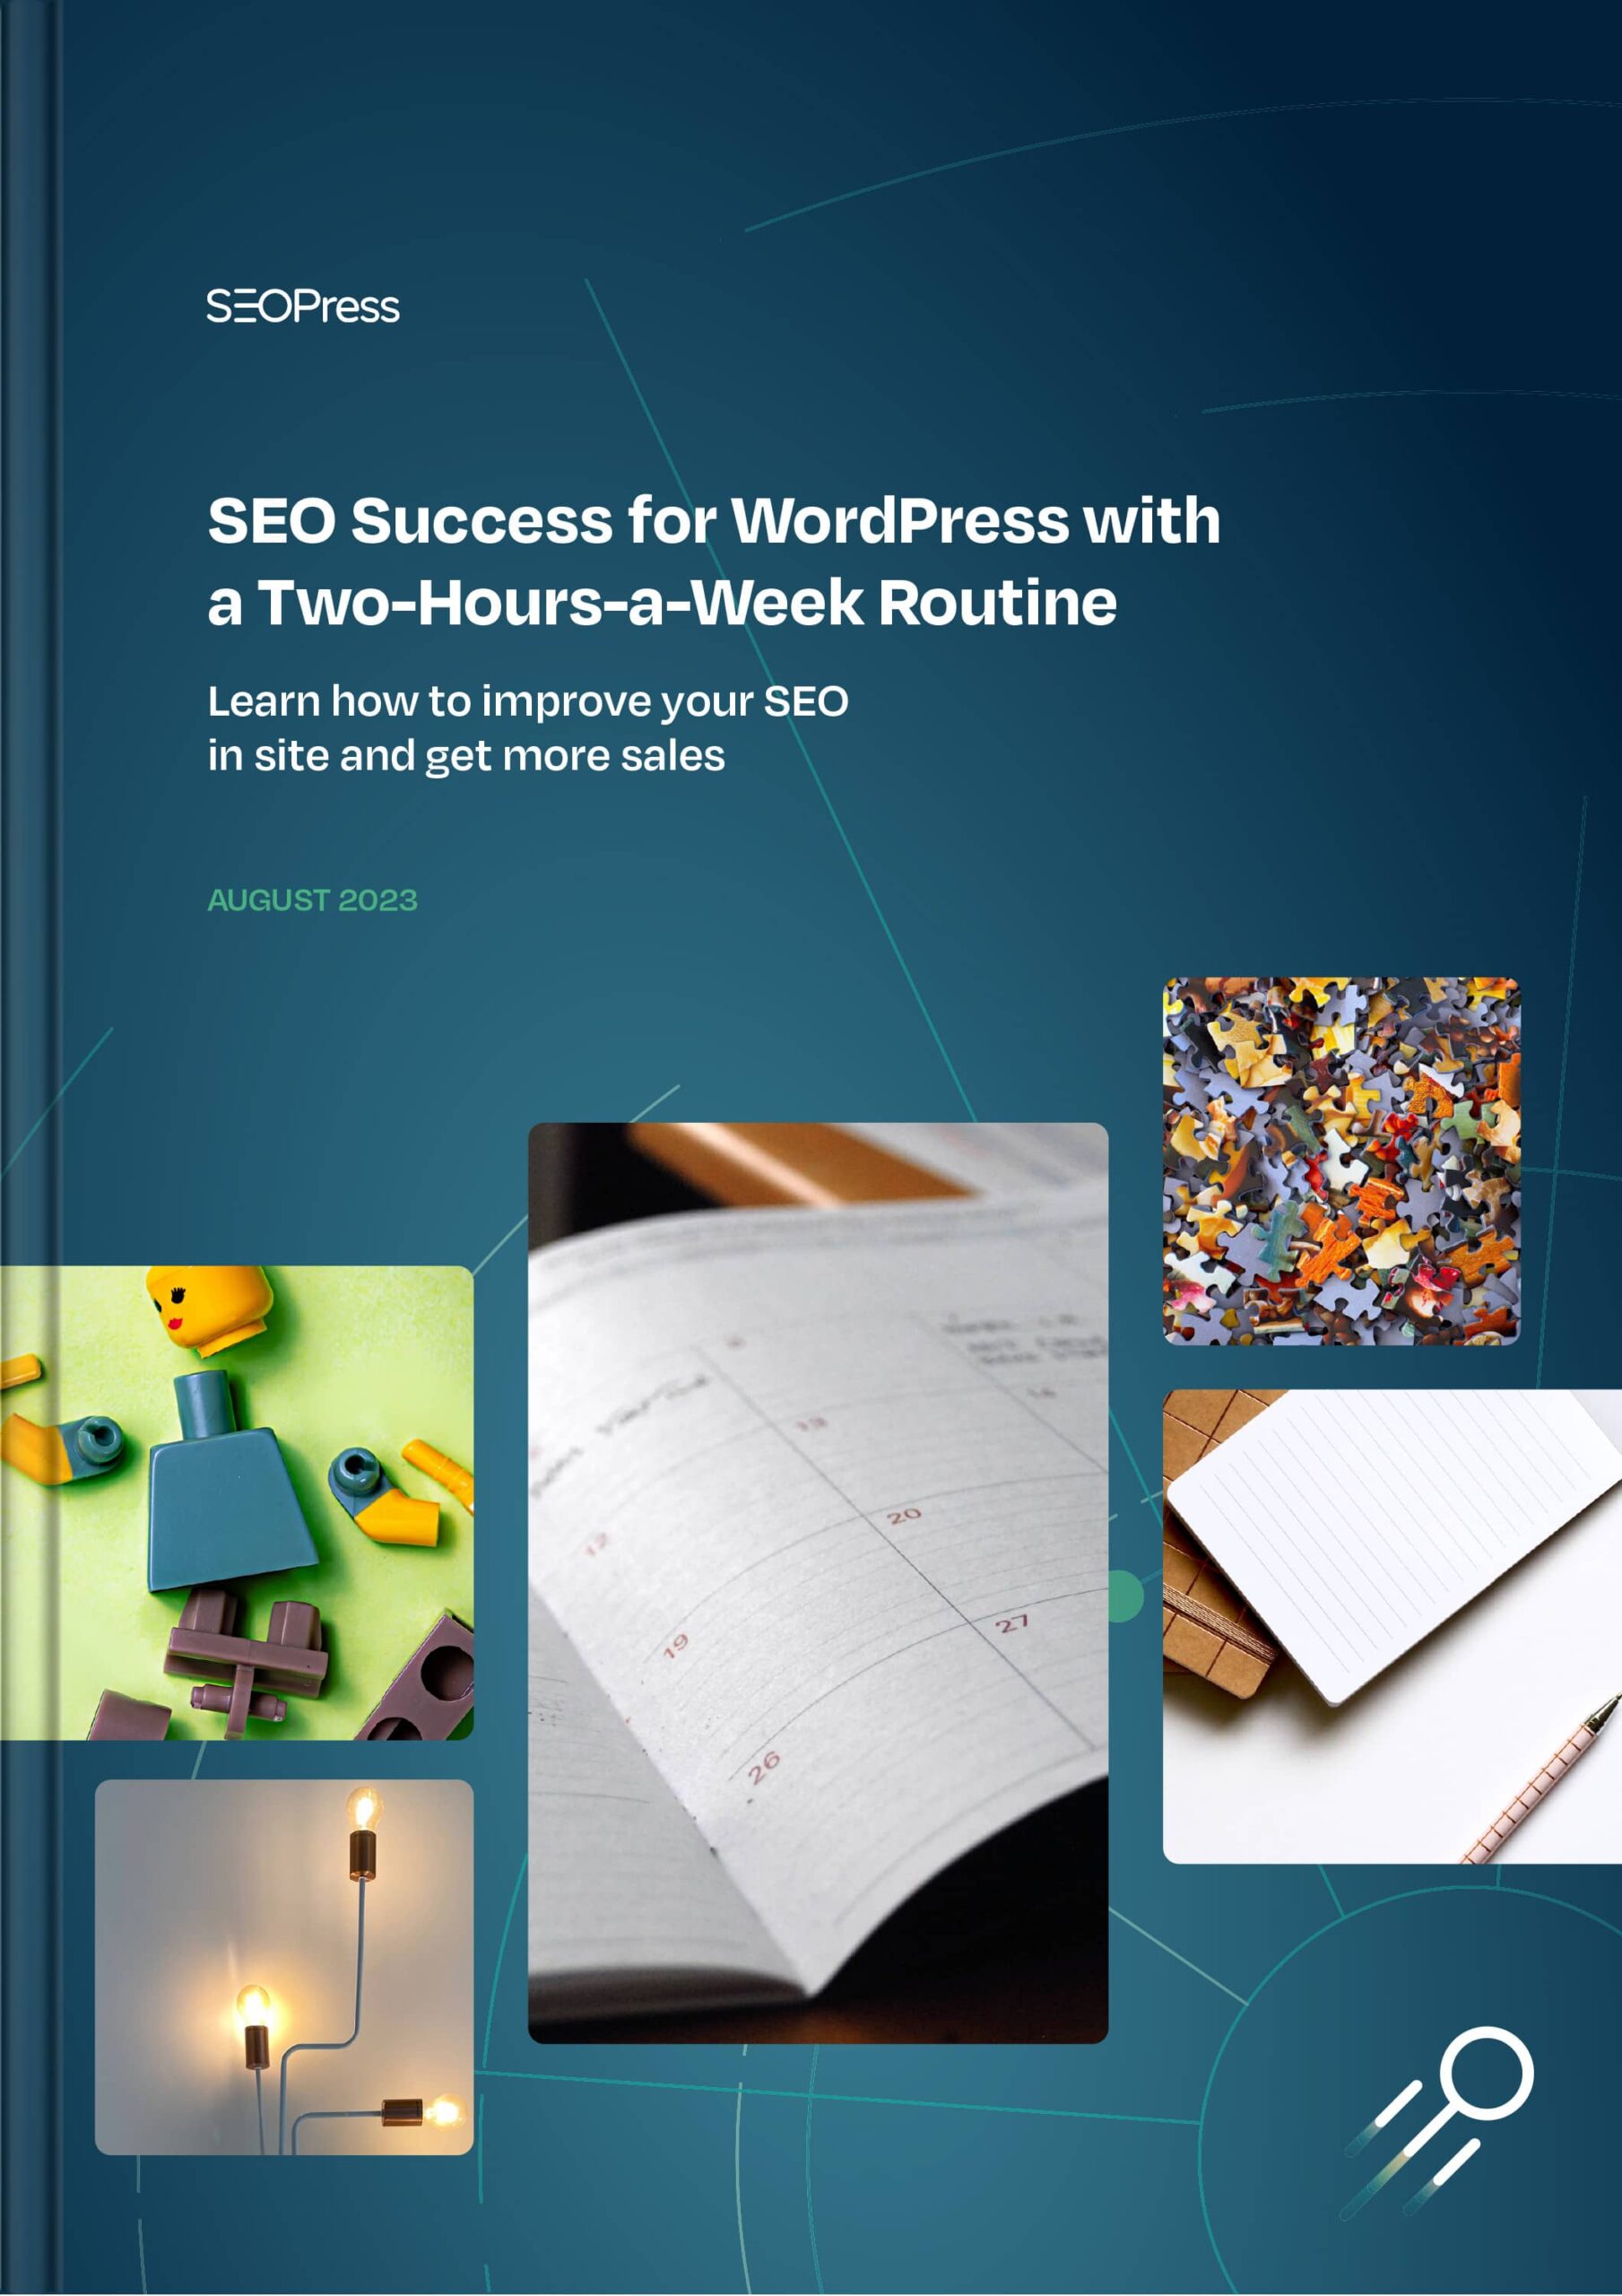 SEO Success for WordPress with a Two-Hours-a-Week Routine